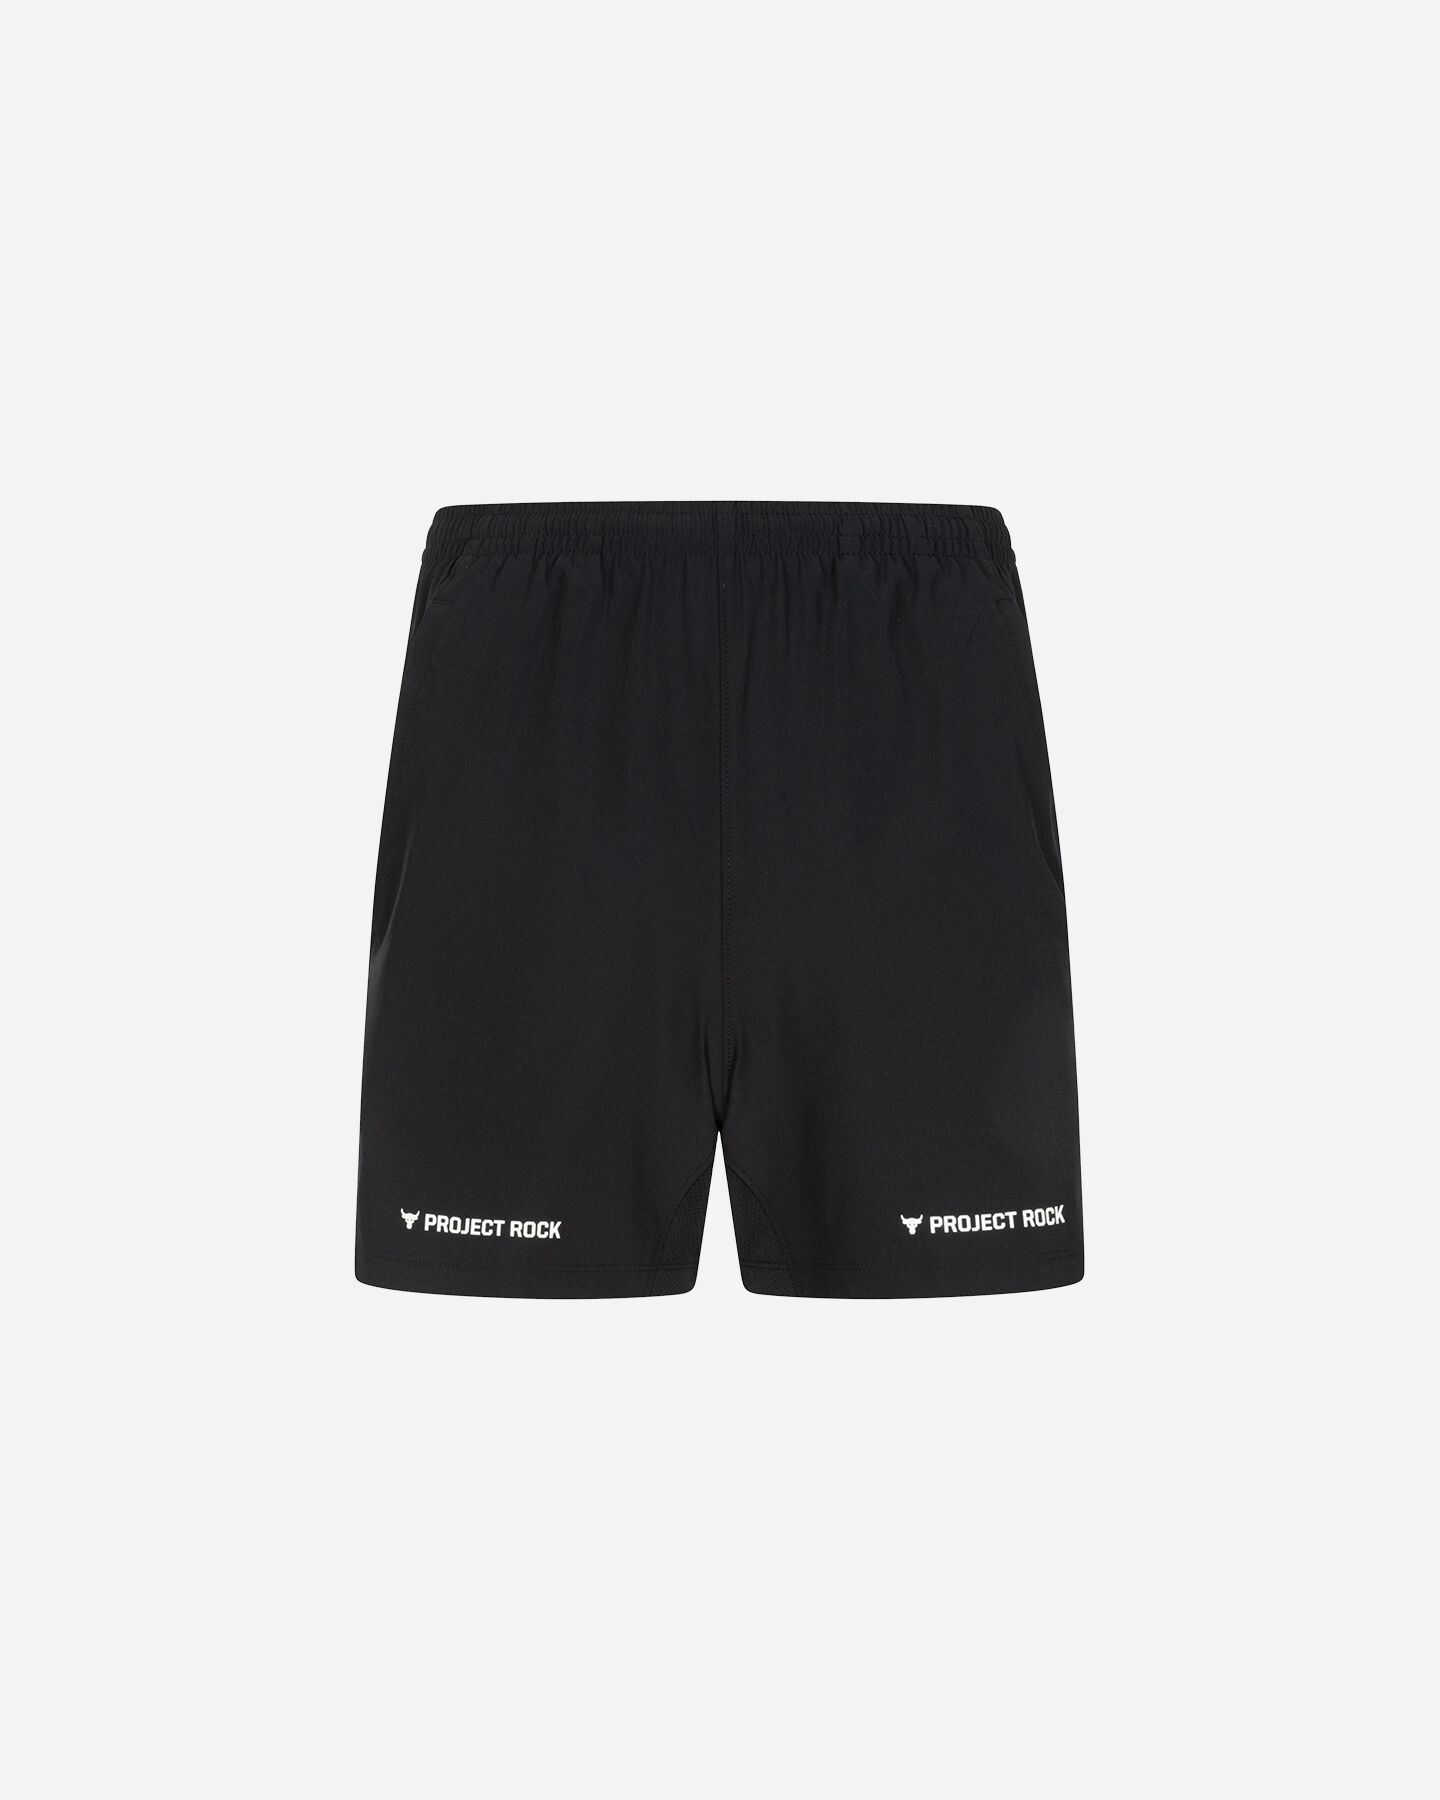  Pantaloncini UNDER ARMOUR THE ROCK ULTIMATE M S5642146|0001|SM scatto 0